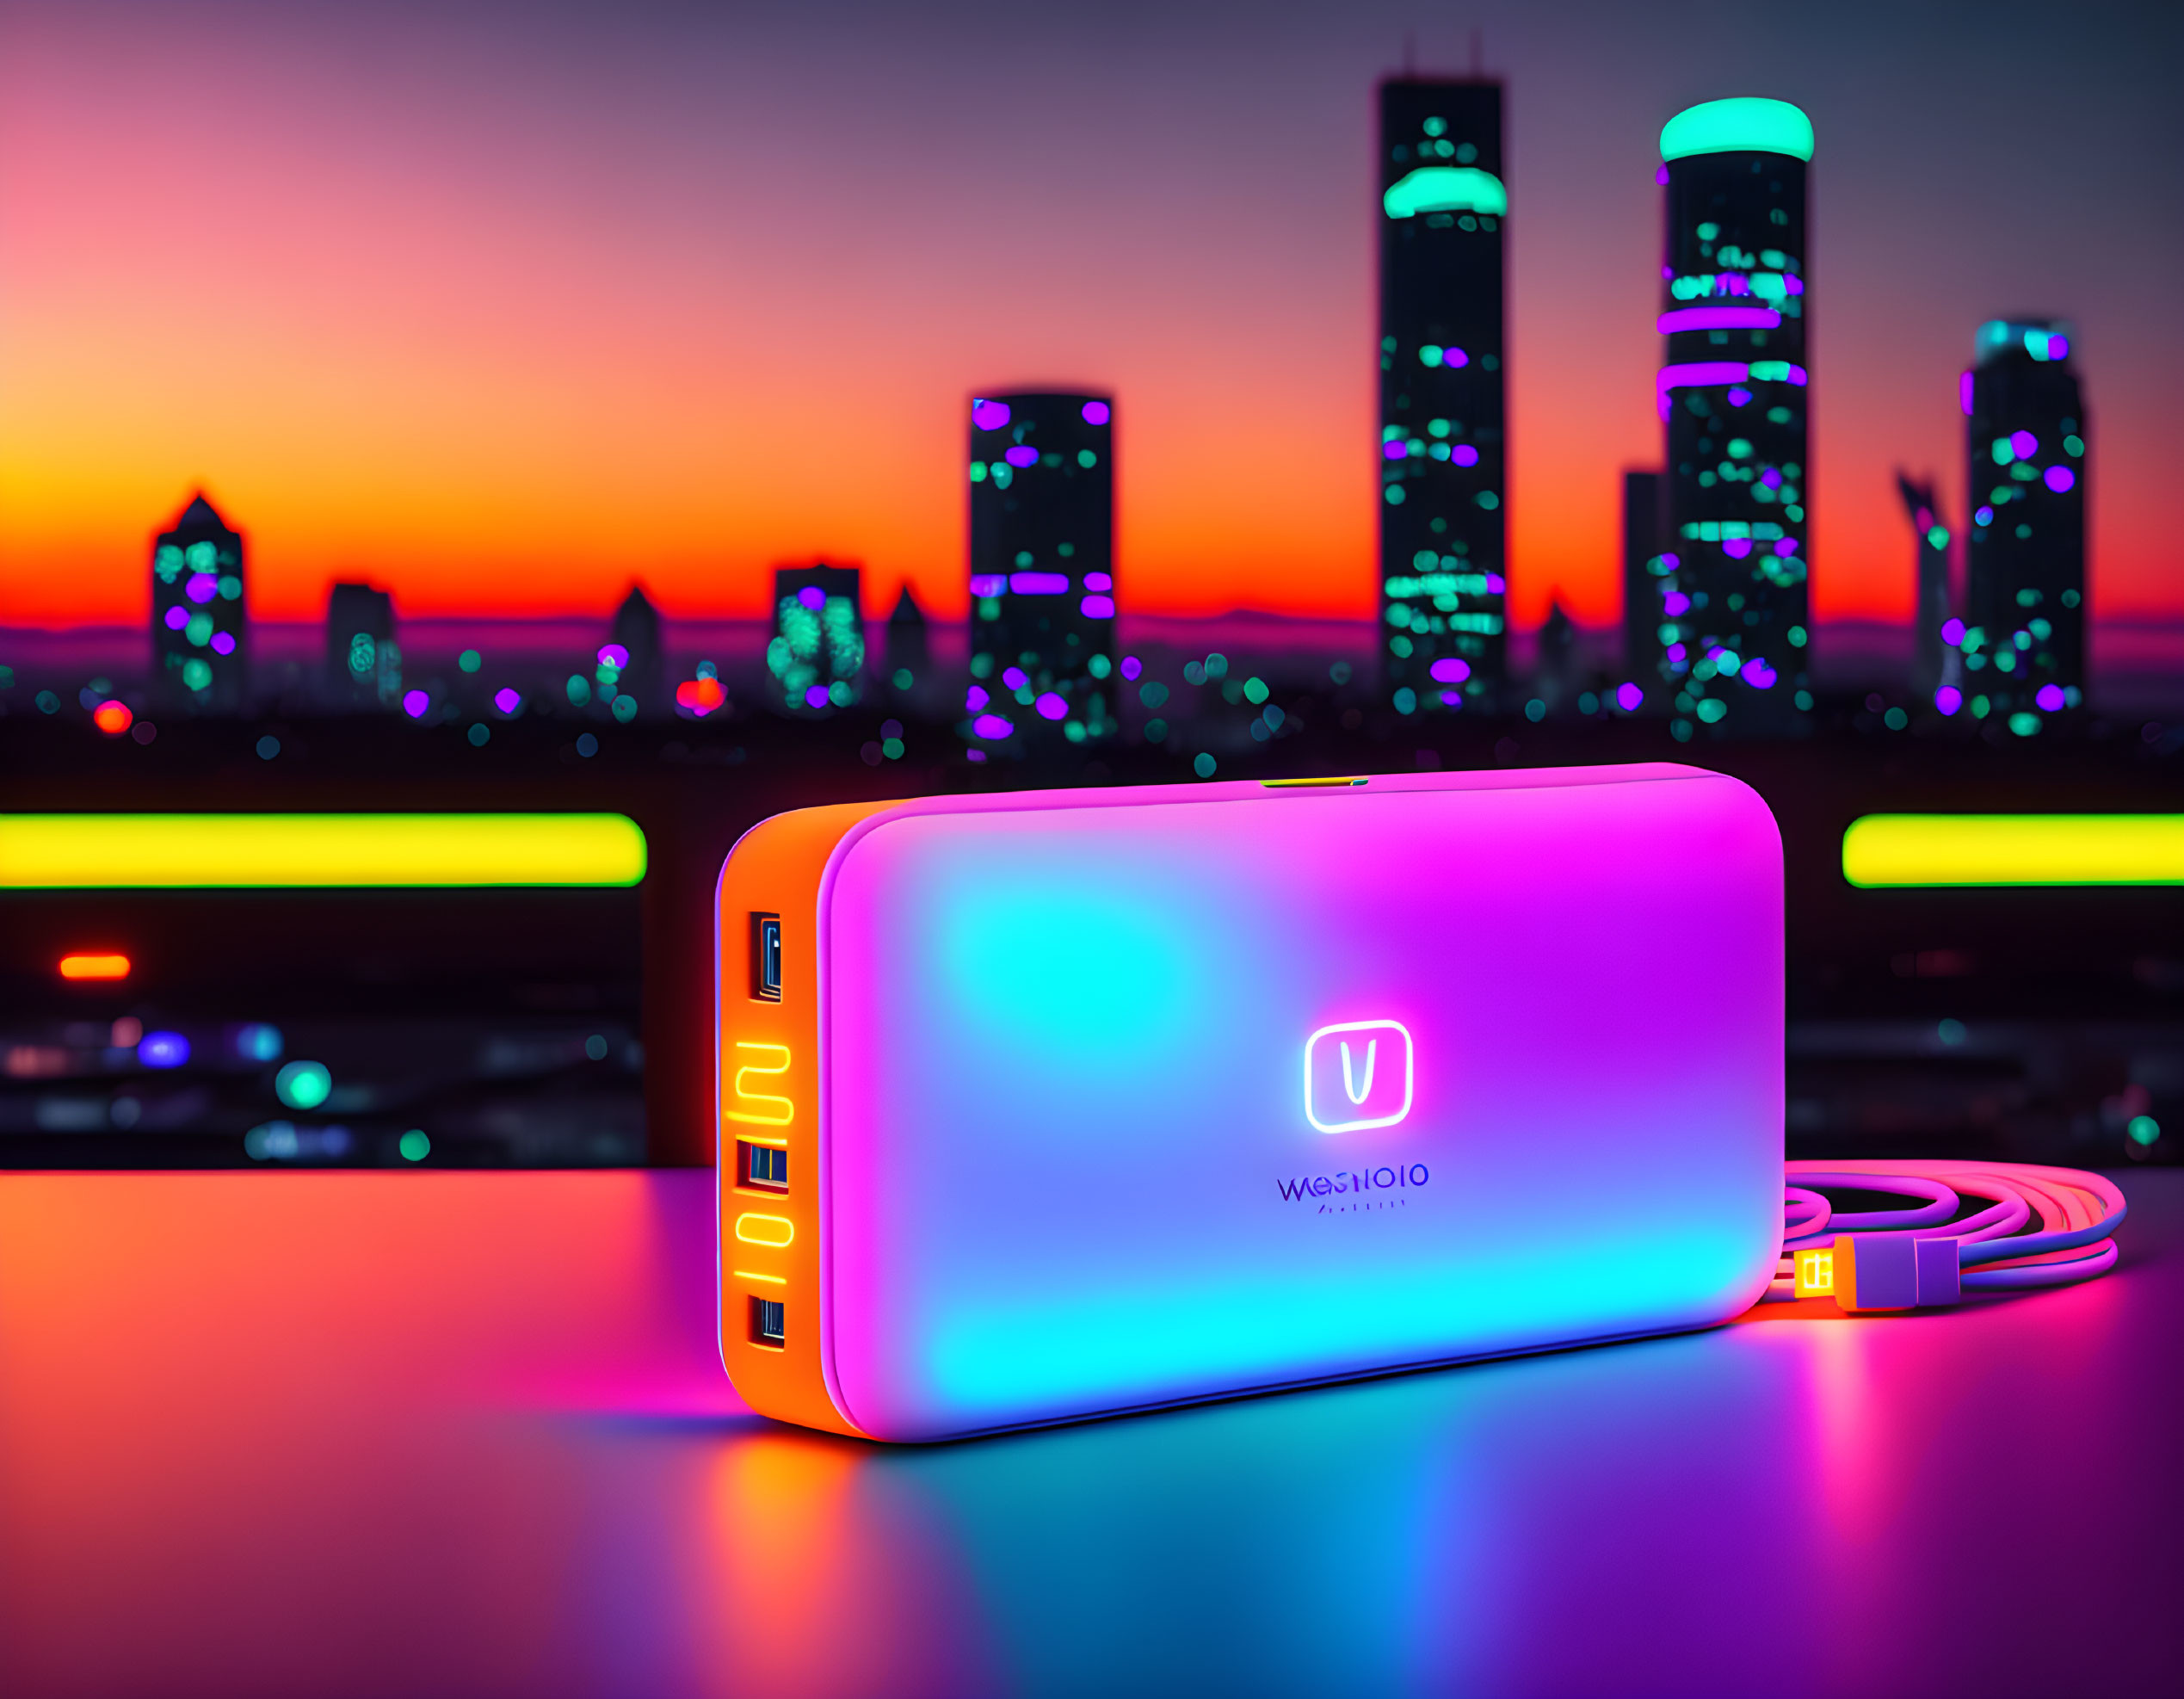 Colorful LED-Lit Power Bank with City Skyline Bokeh at Sunset